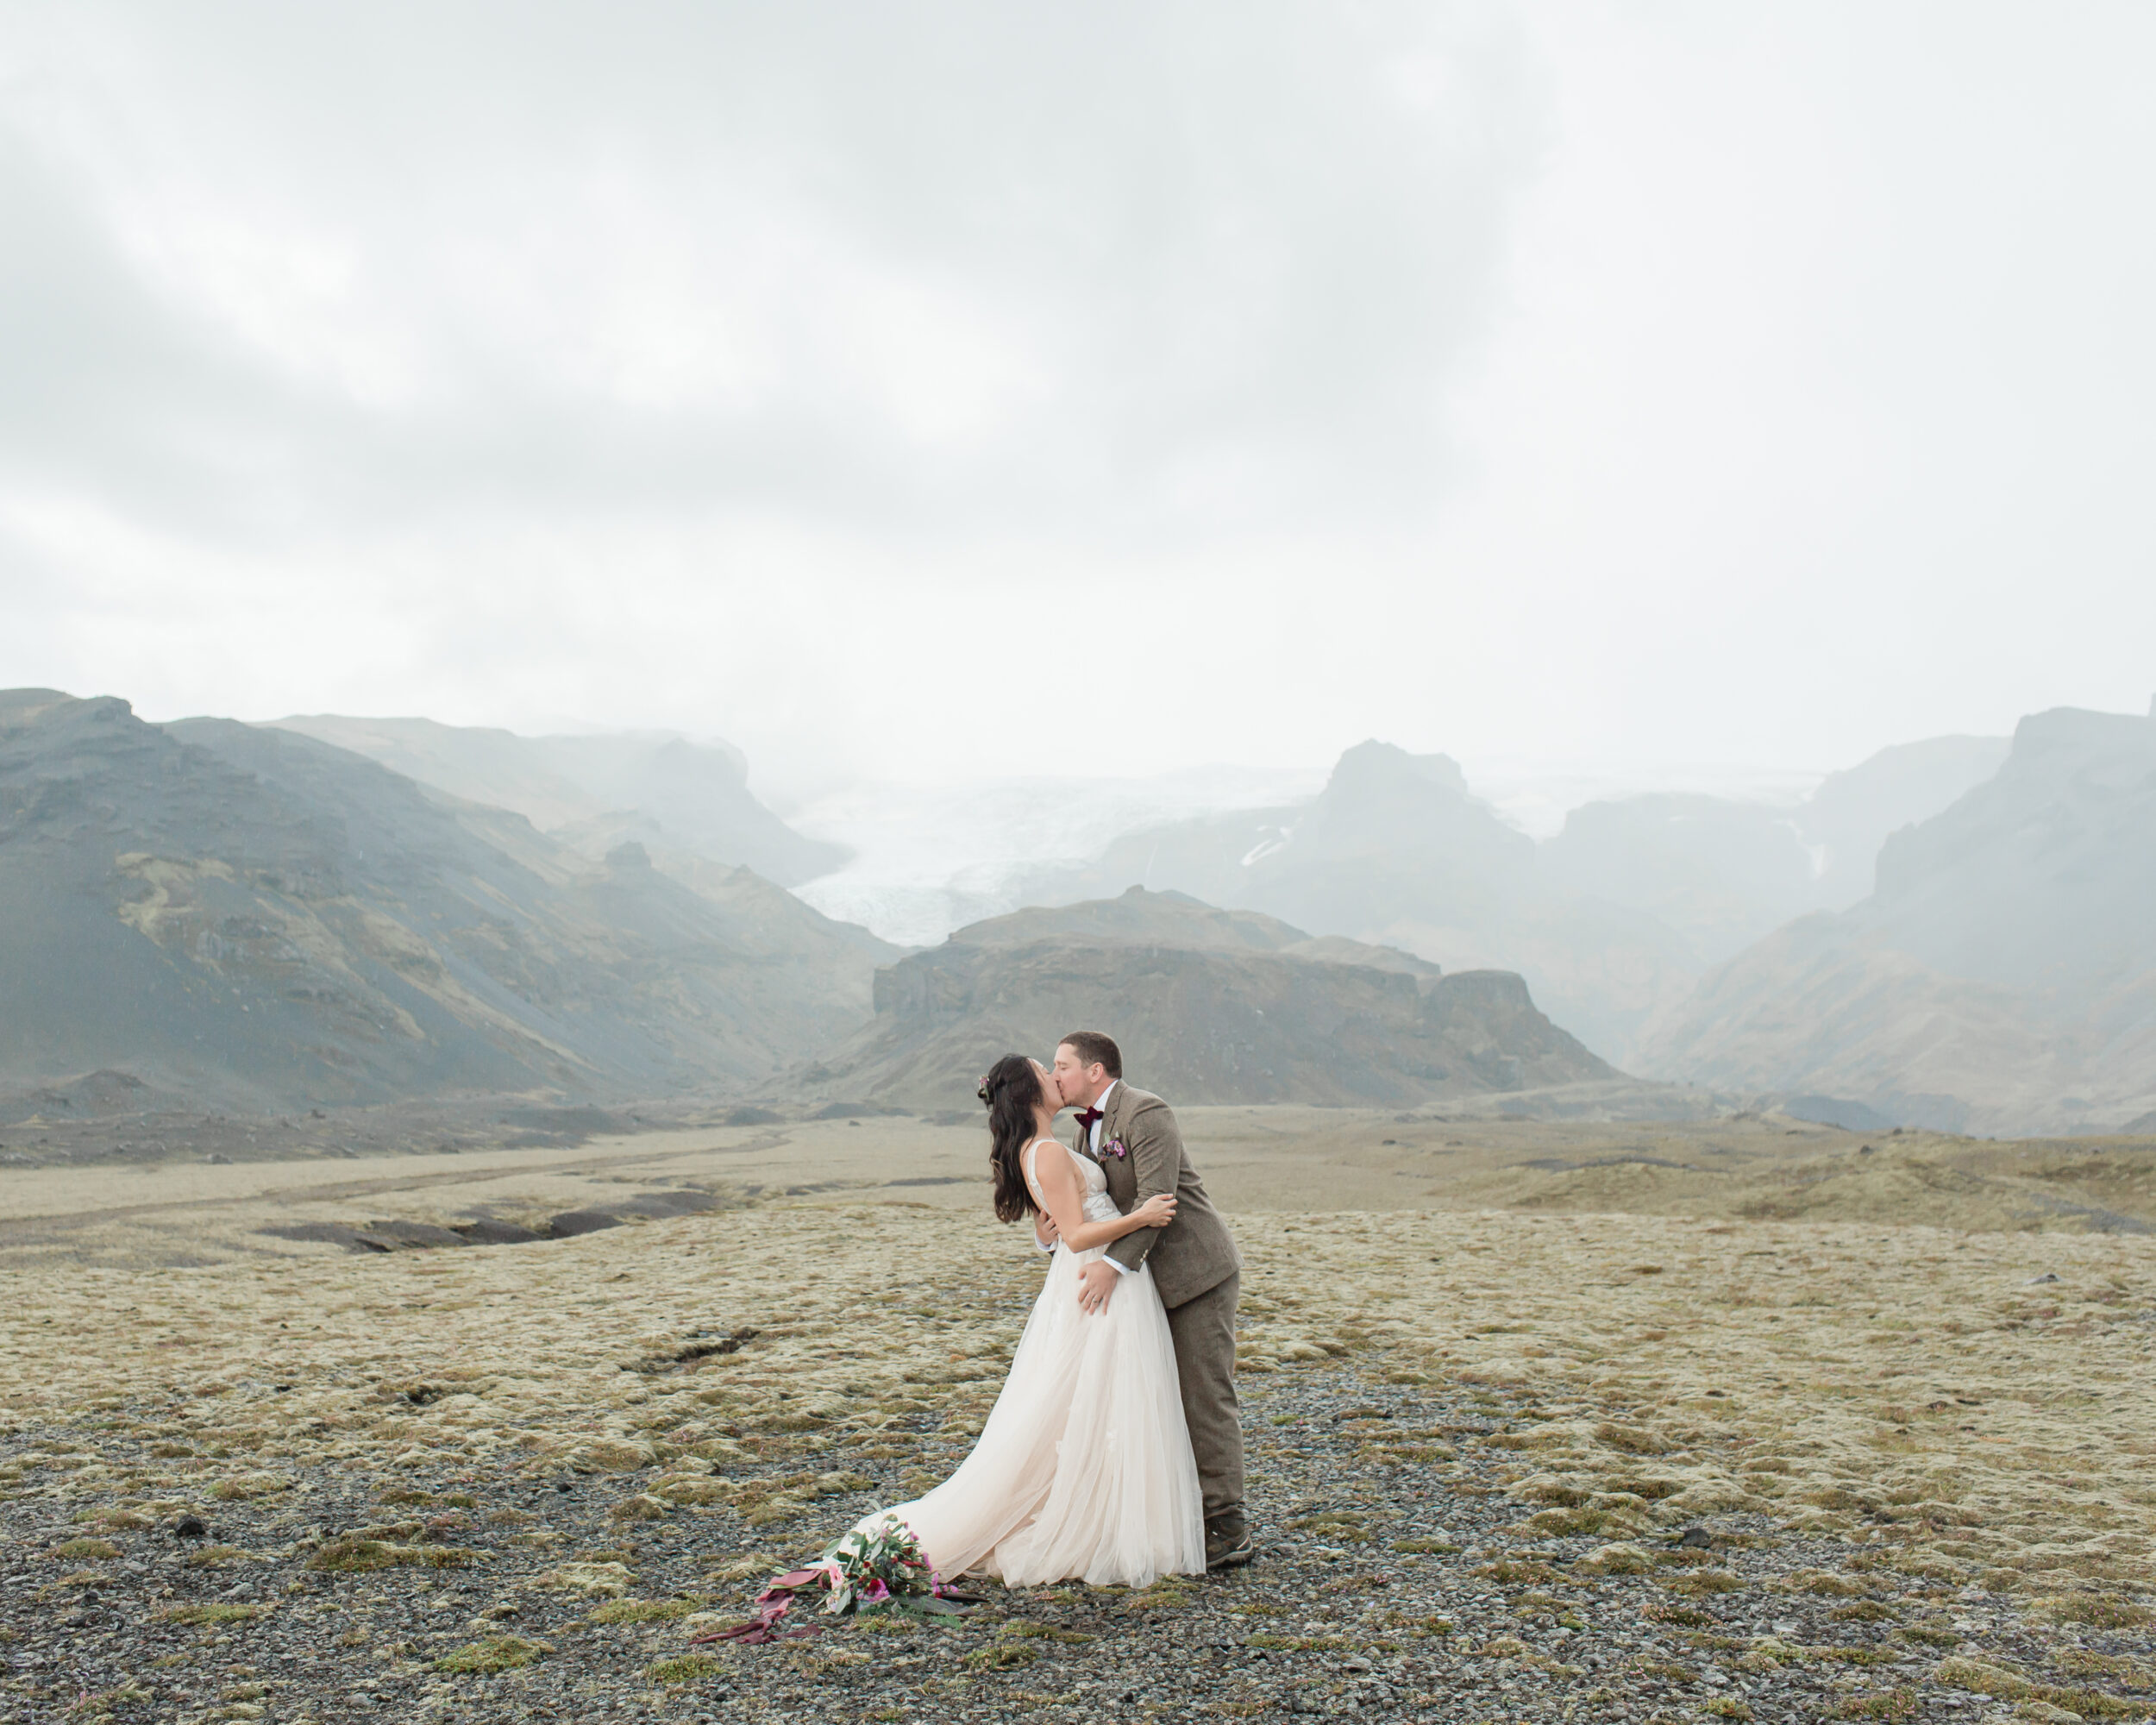 A couple in neutral wedding attire kisses beneath mountain peaks in Iceland.